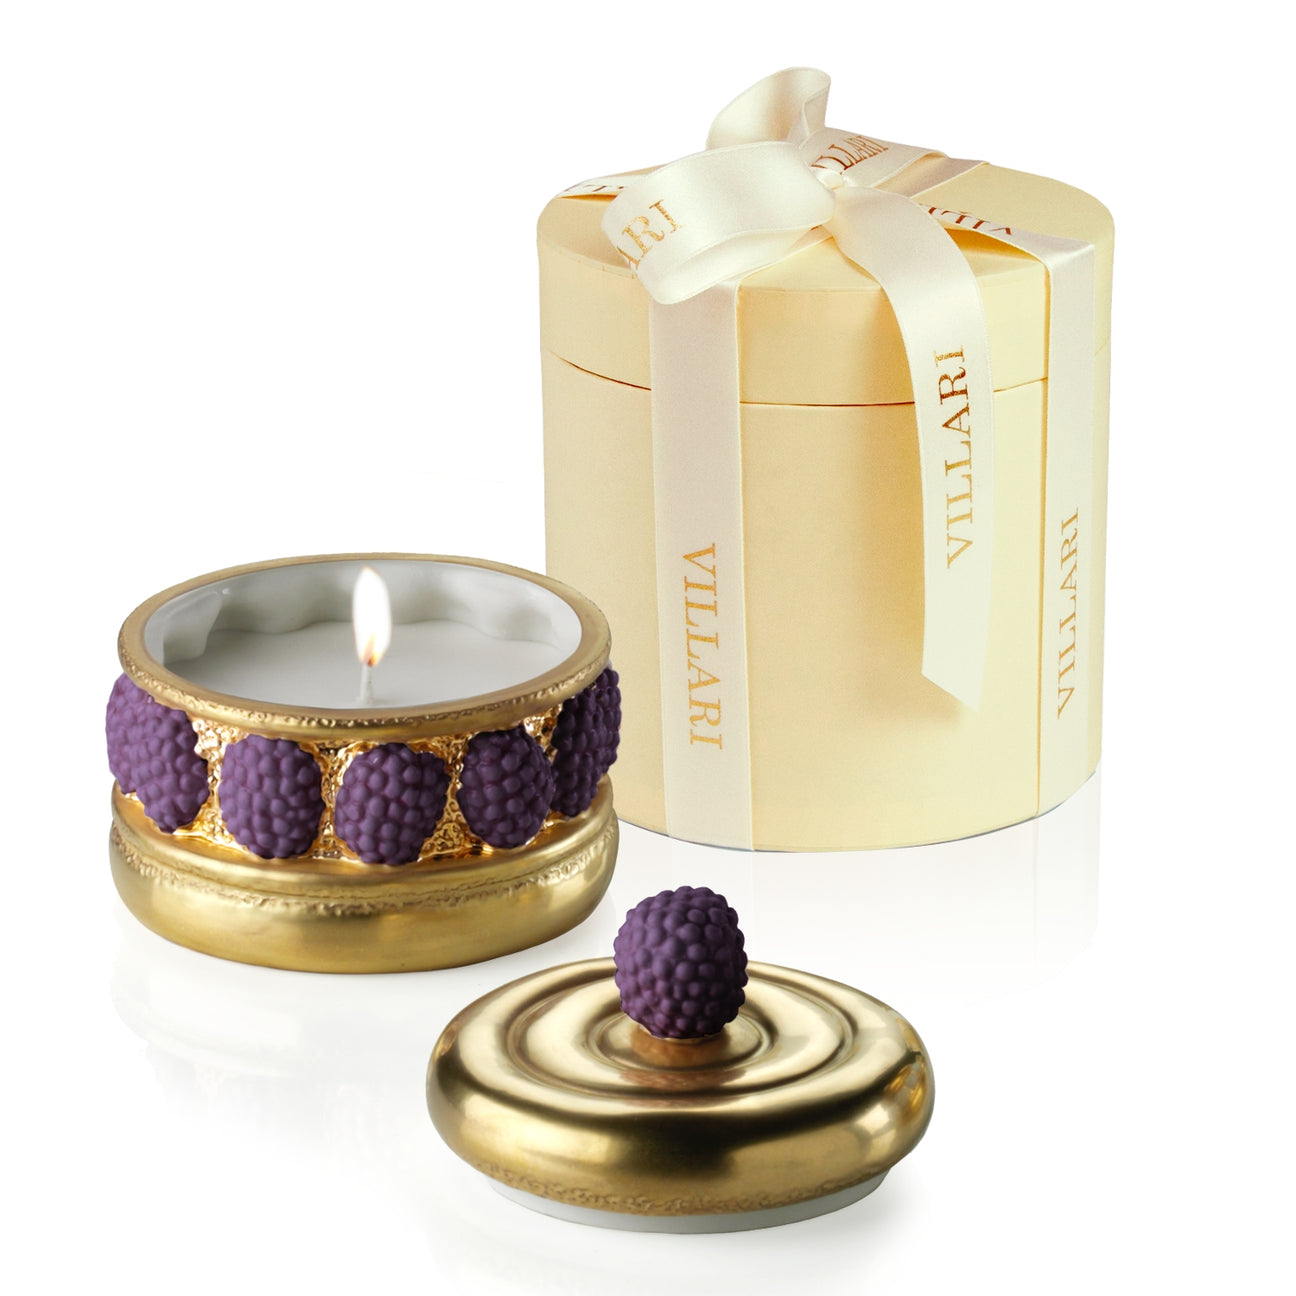 Chantilly Ispahan Cake Scented Candle - Gold &amp; Fuchsia 